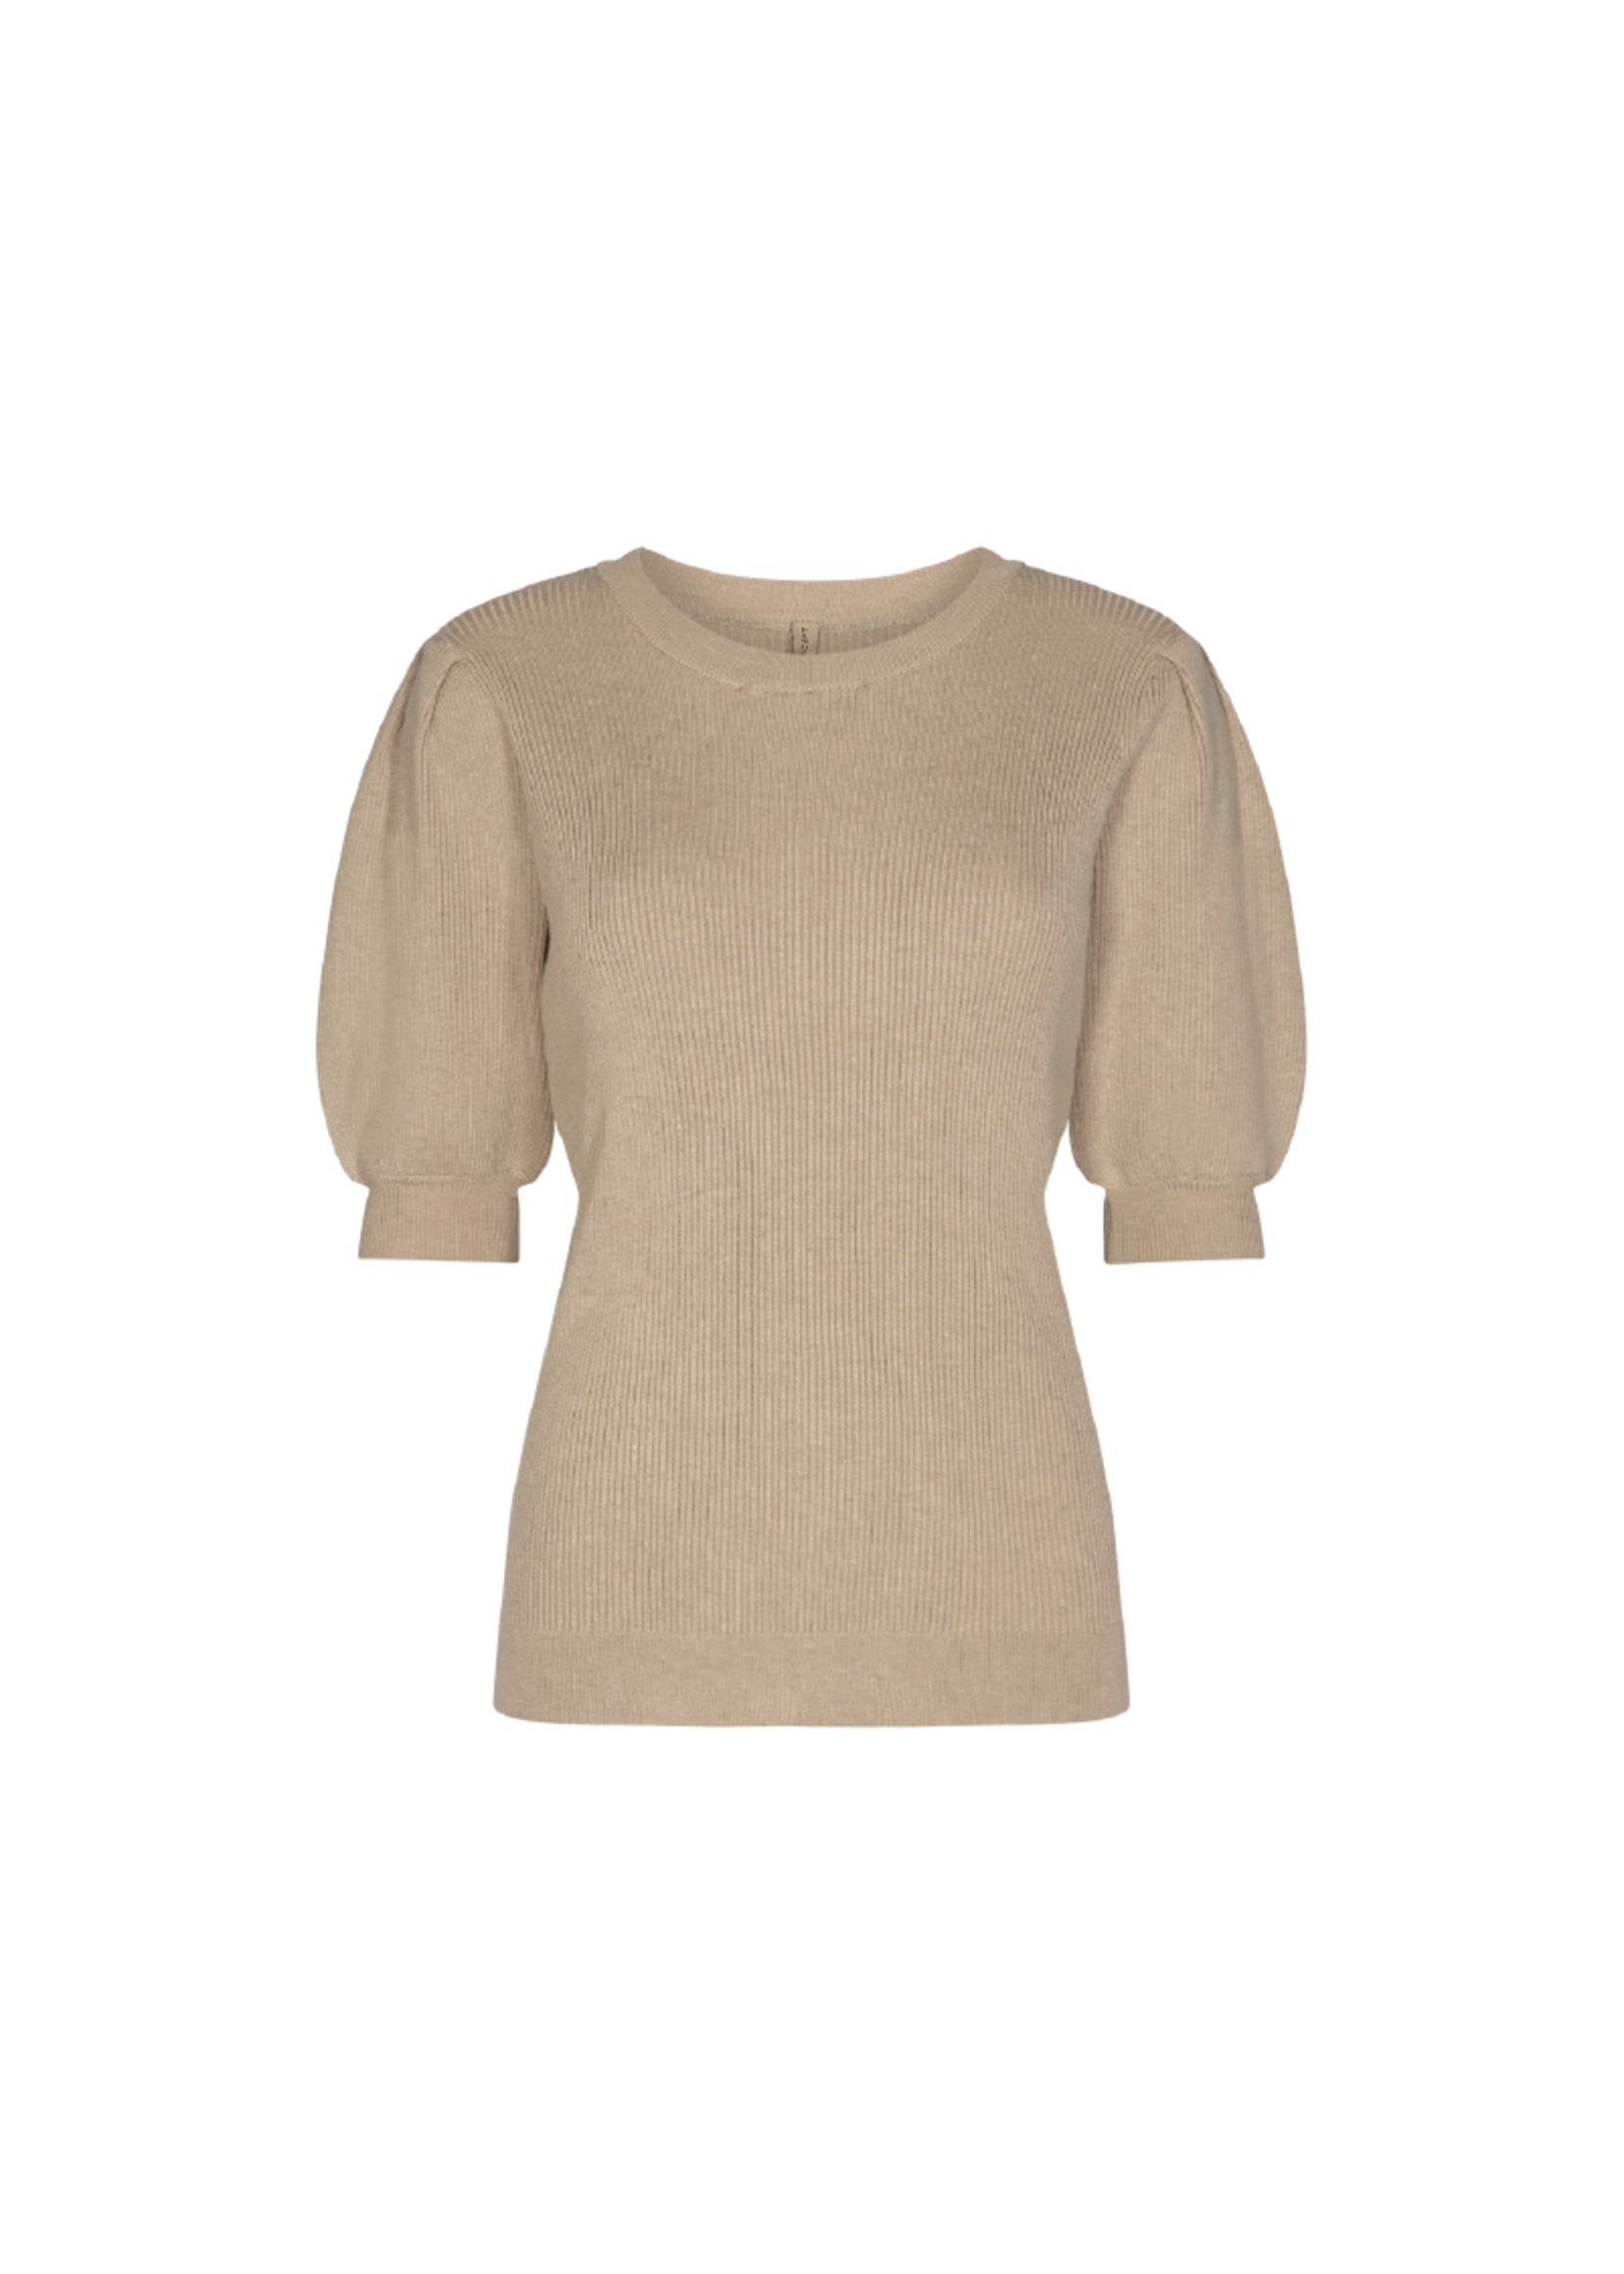 Soya Concept 3/4 Puff Sleeve Knit Top